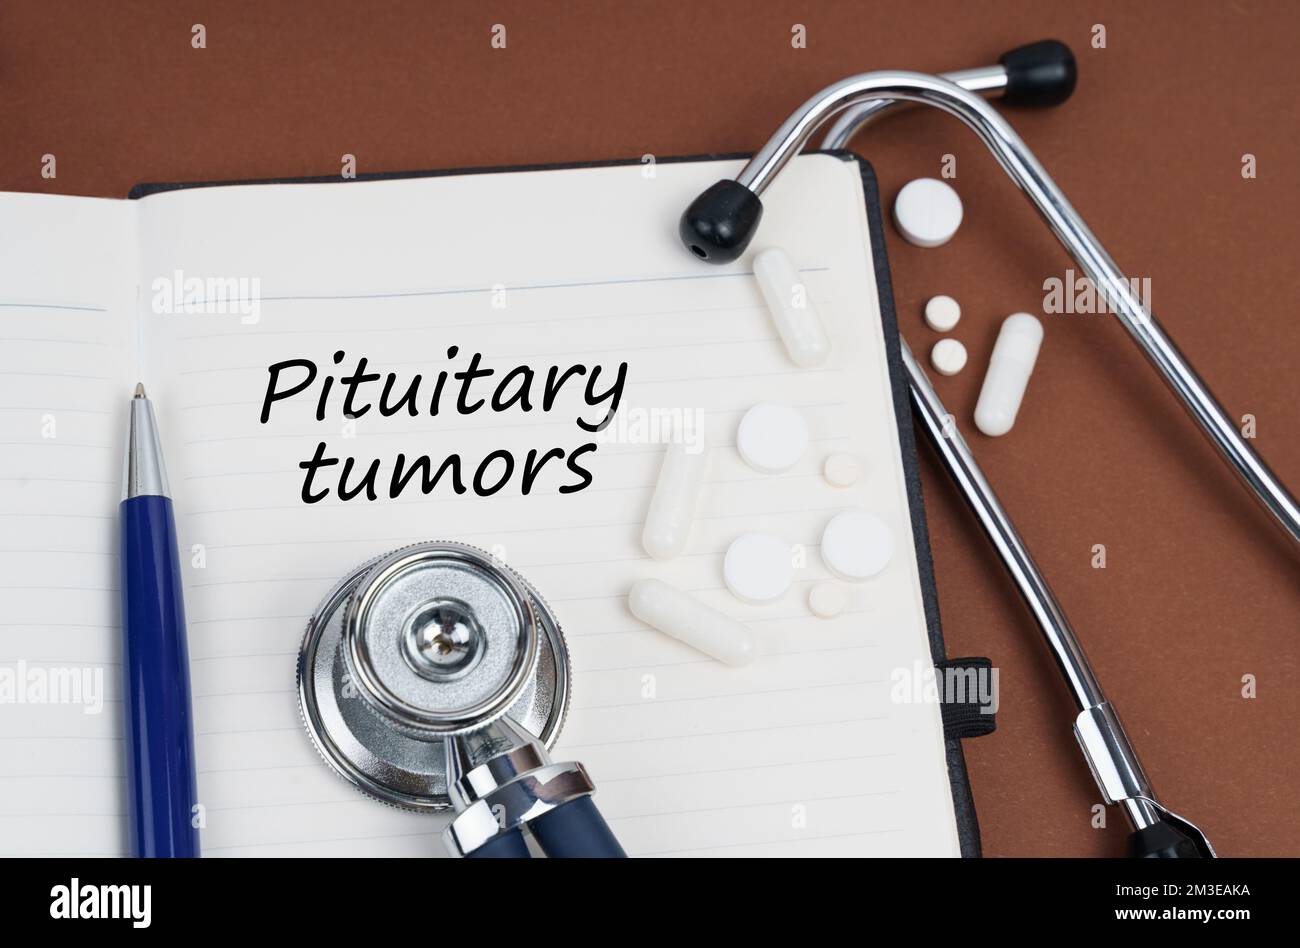 Medicine and health concept. On a brown surface lie pills, a pen, a stethoscope and a notebook with the inscription - pituitary tumors Stock Photo